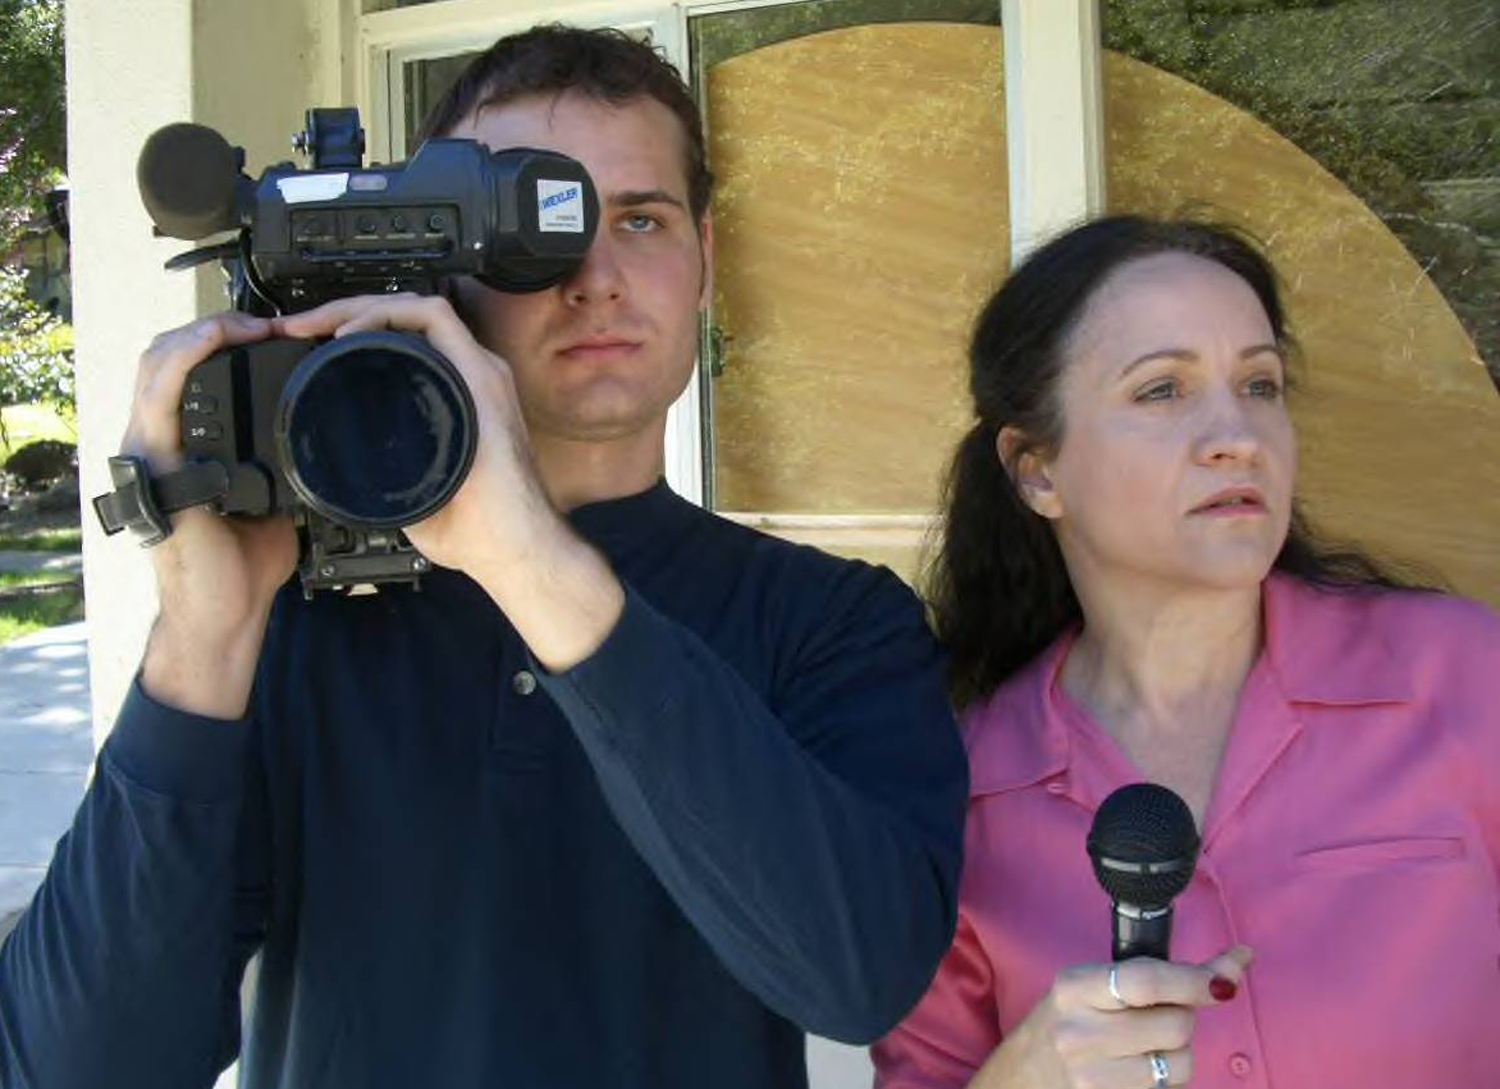 as TV reporter in Abe and Bruno - filmed on the Paramount Ranch in Woodland Hills, California 2005